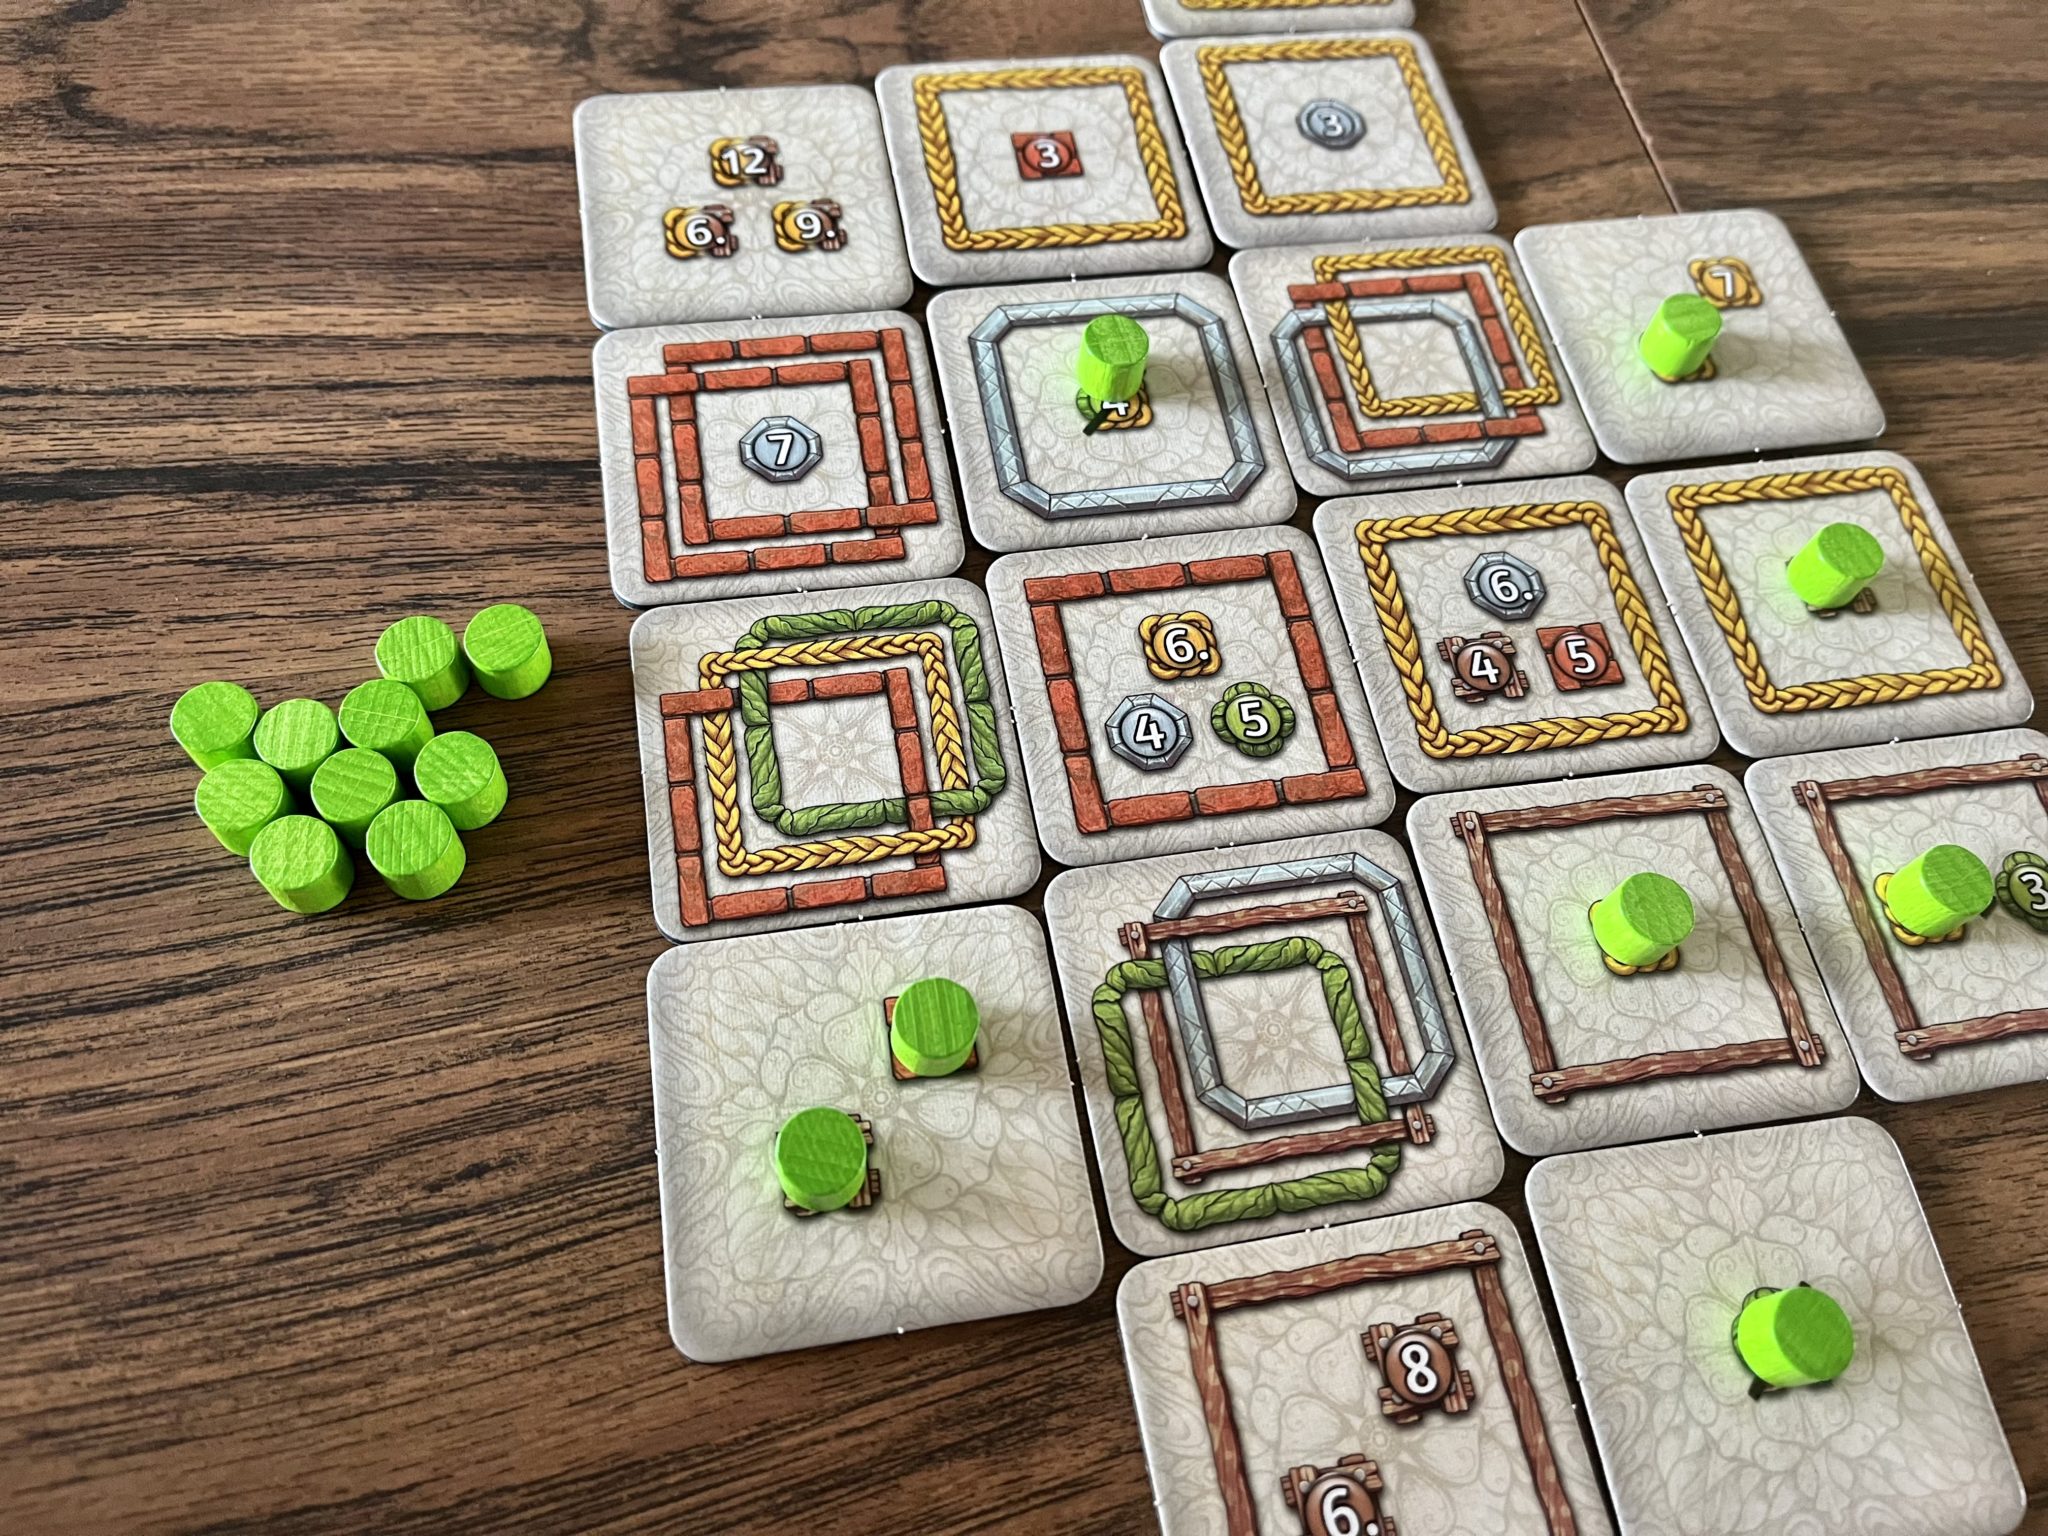 Framework green player placing down tokens on their tiles
